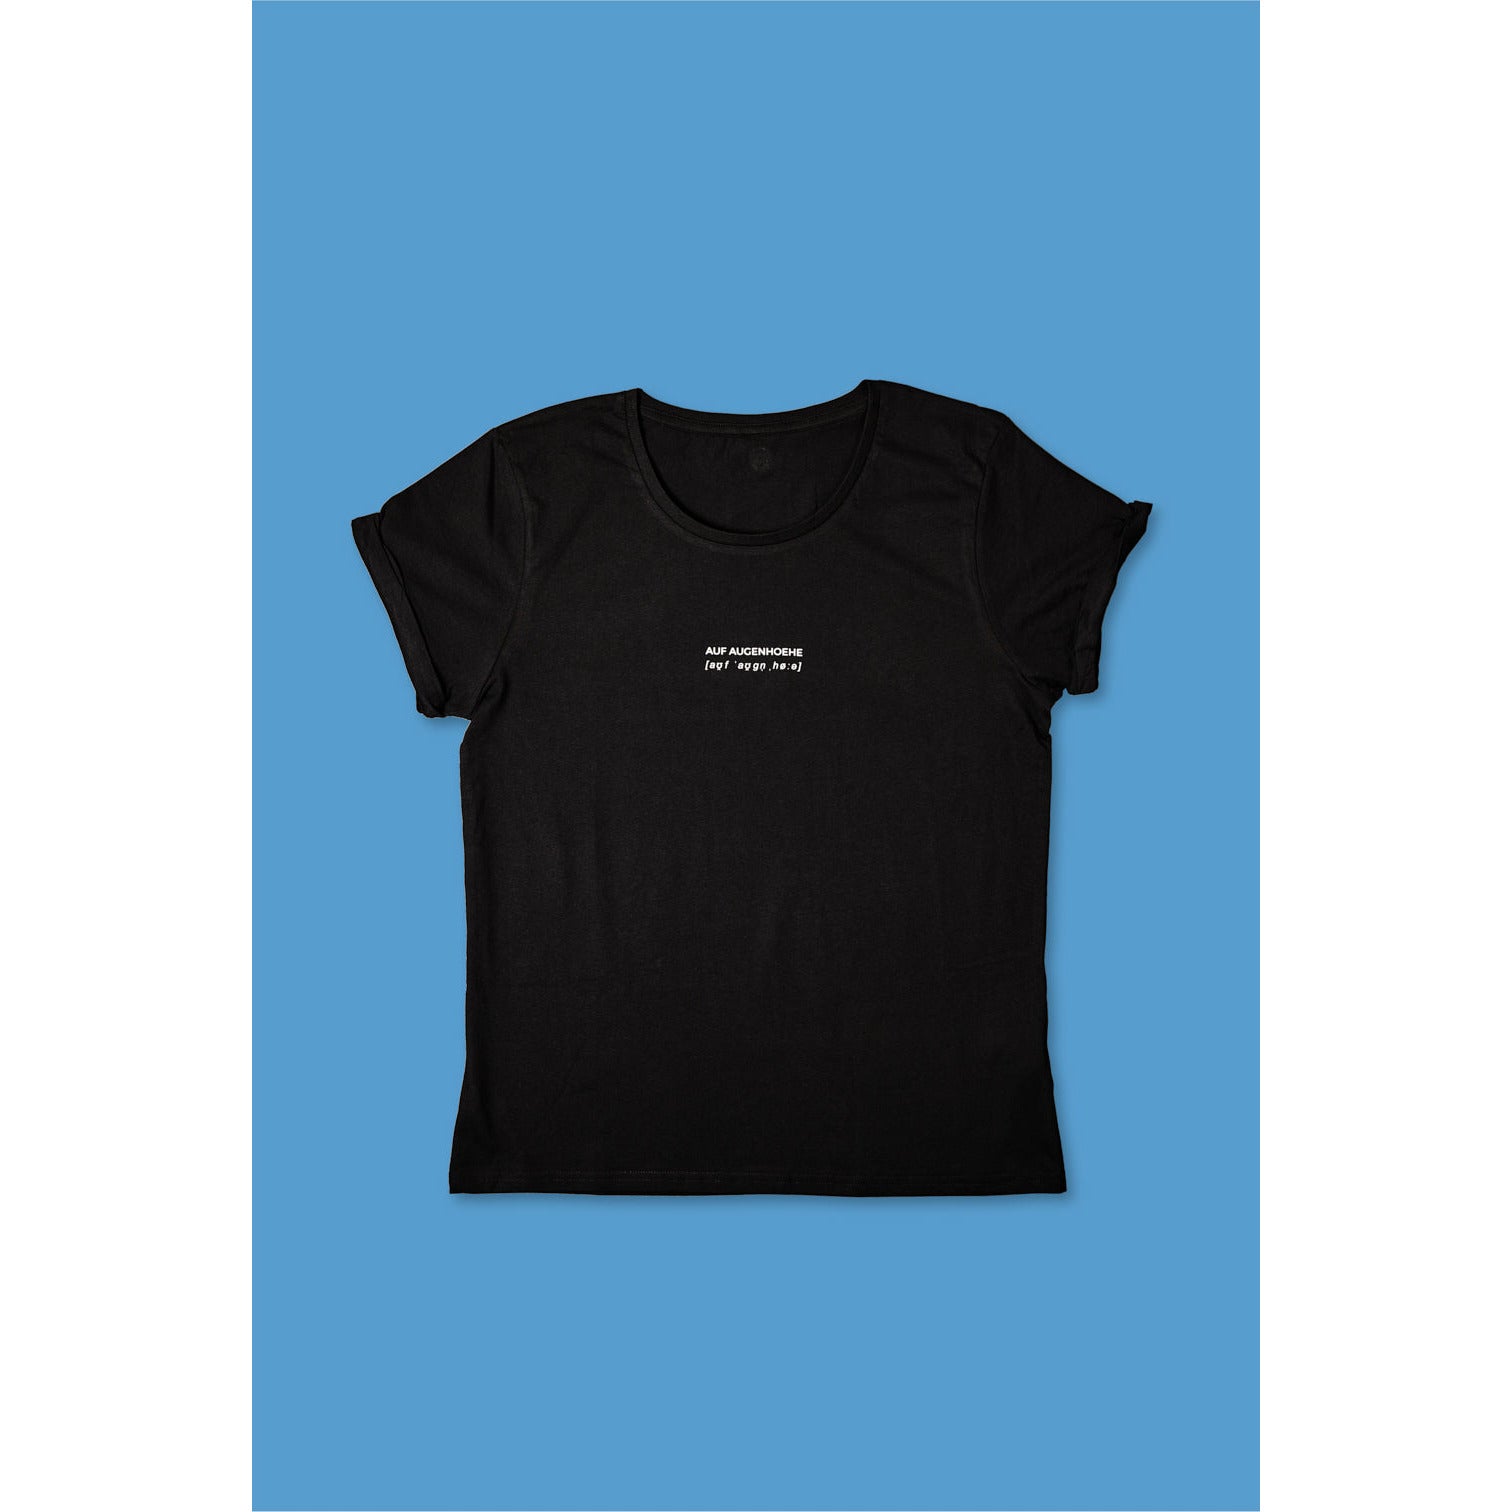 black t-shirt with white small text